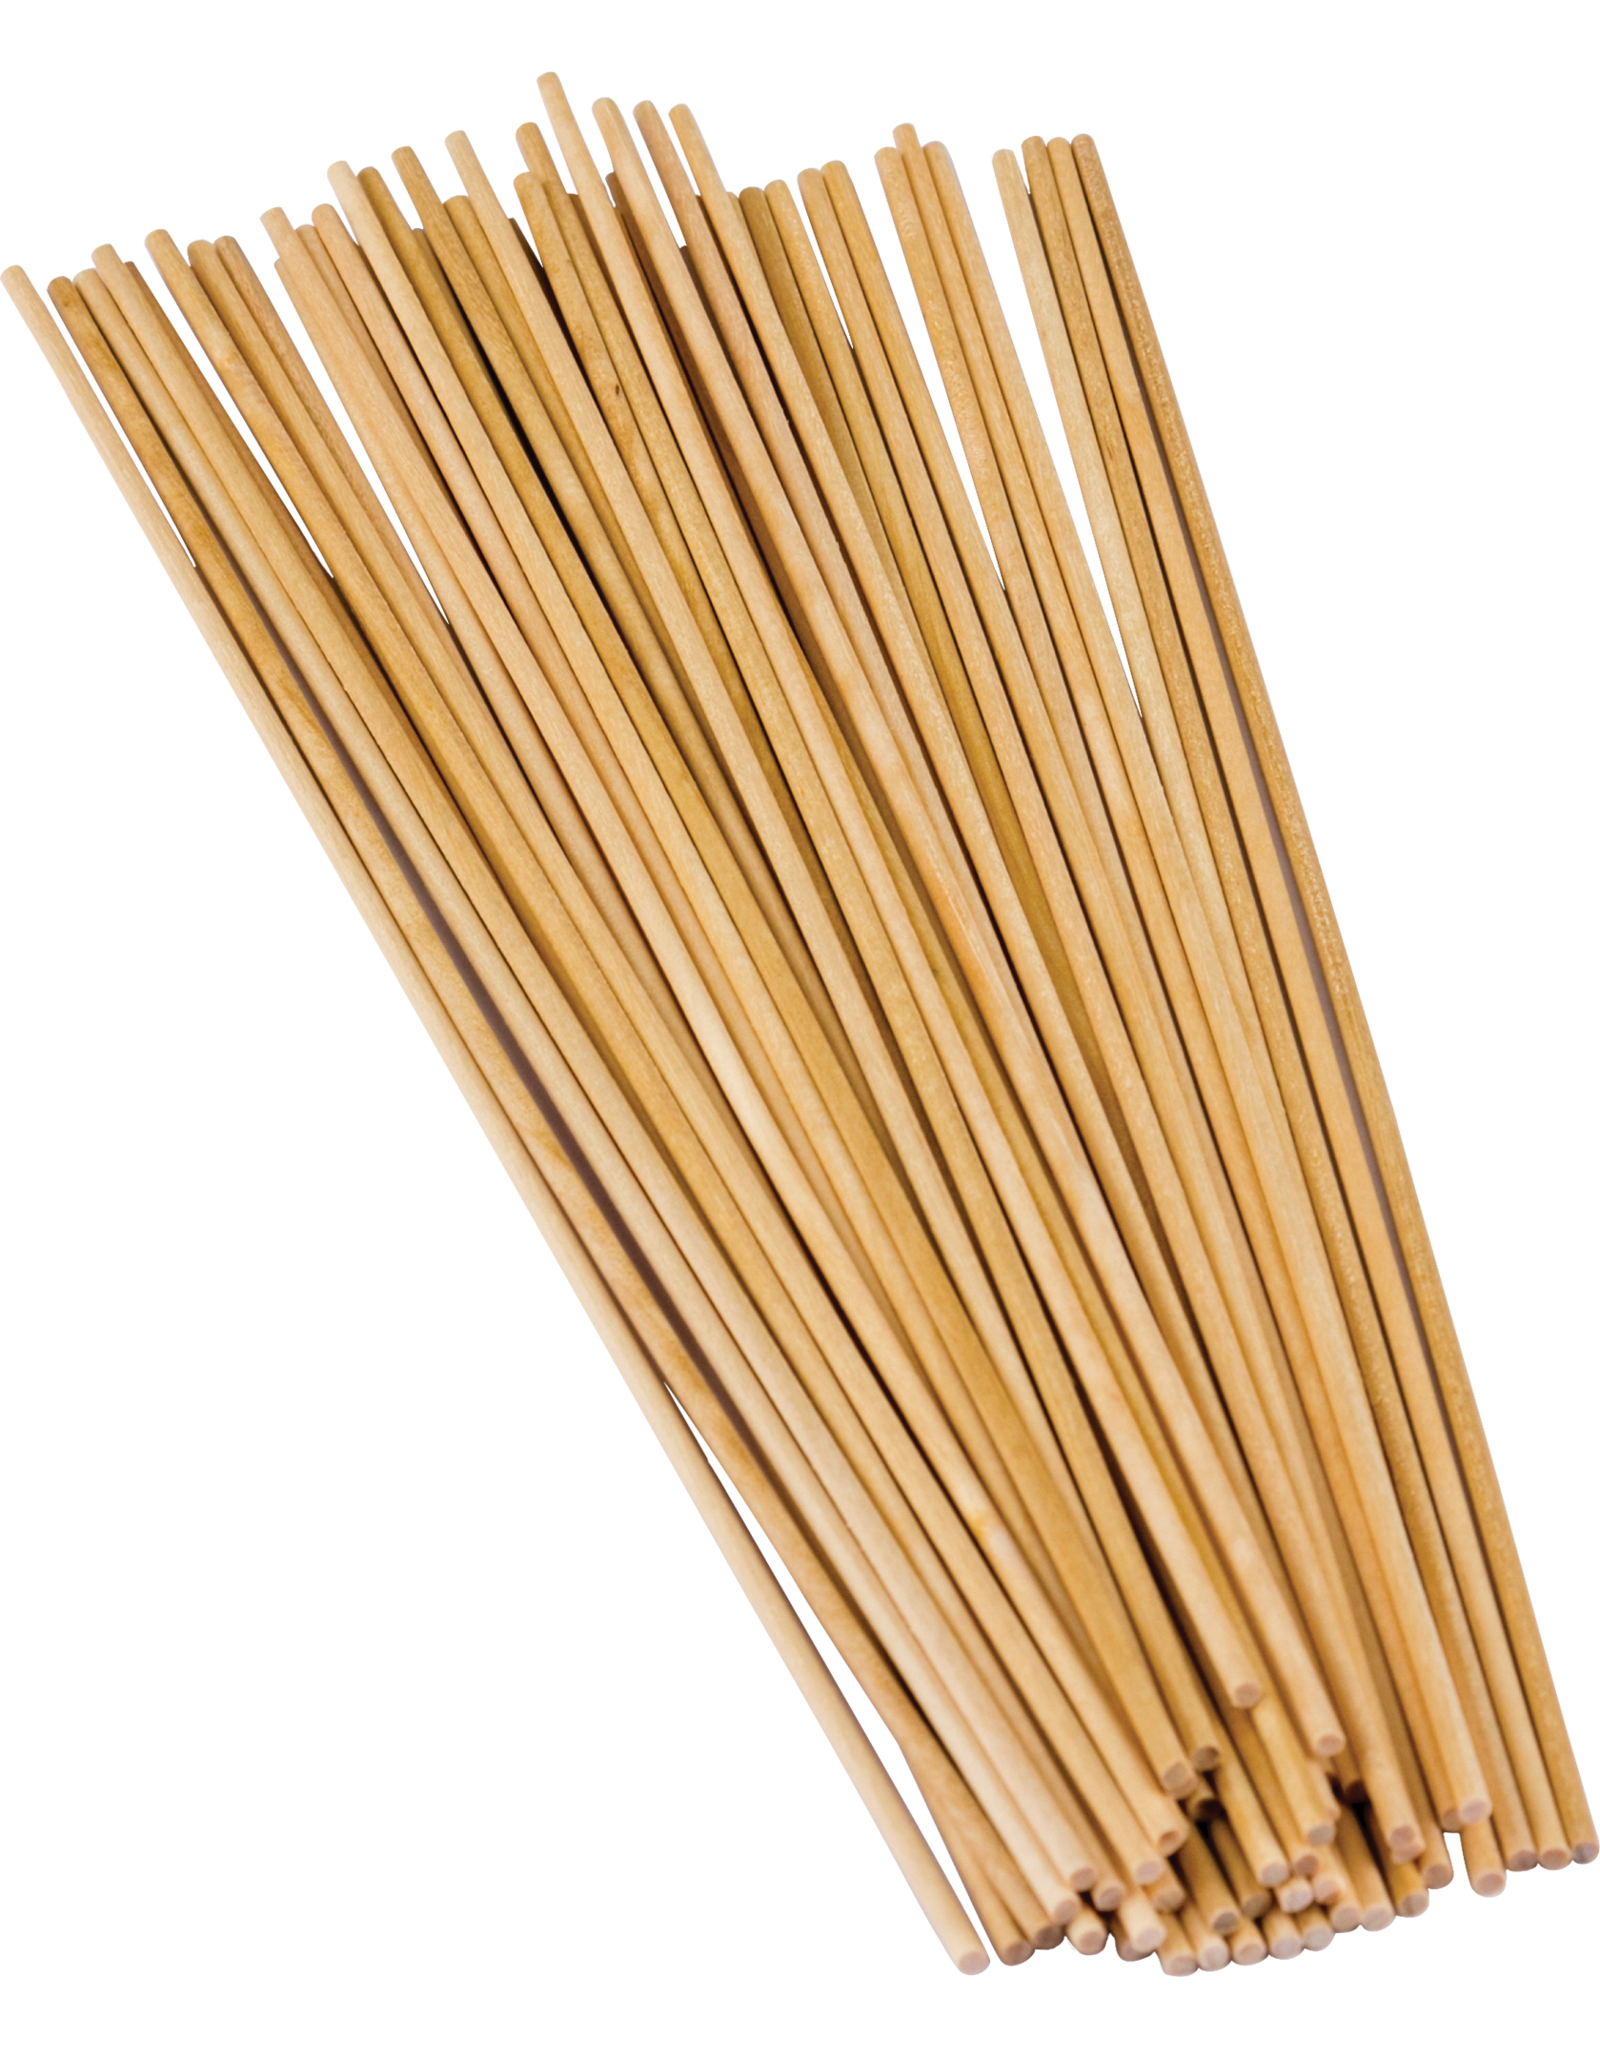 1/8 Inch Wood Dowels 100 Pieces